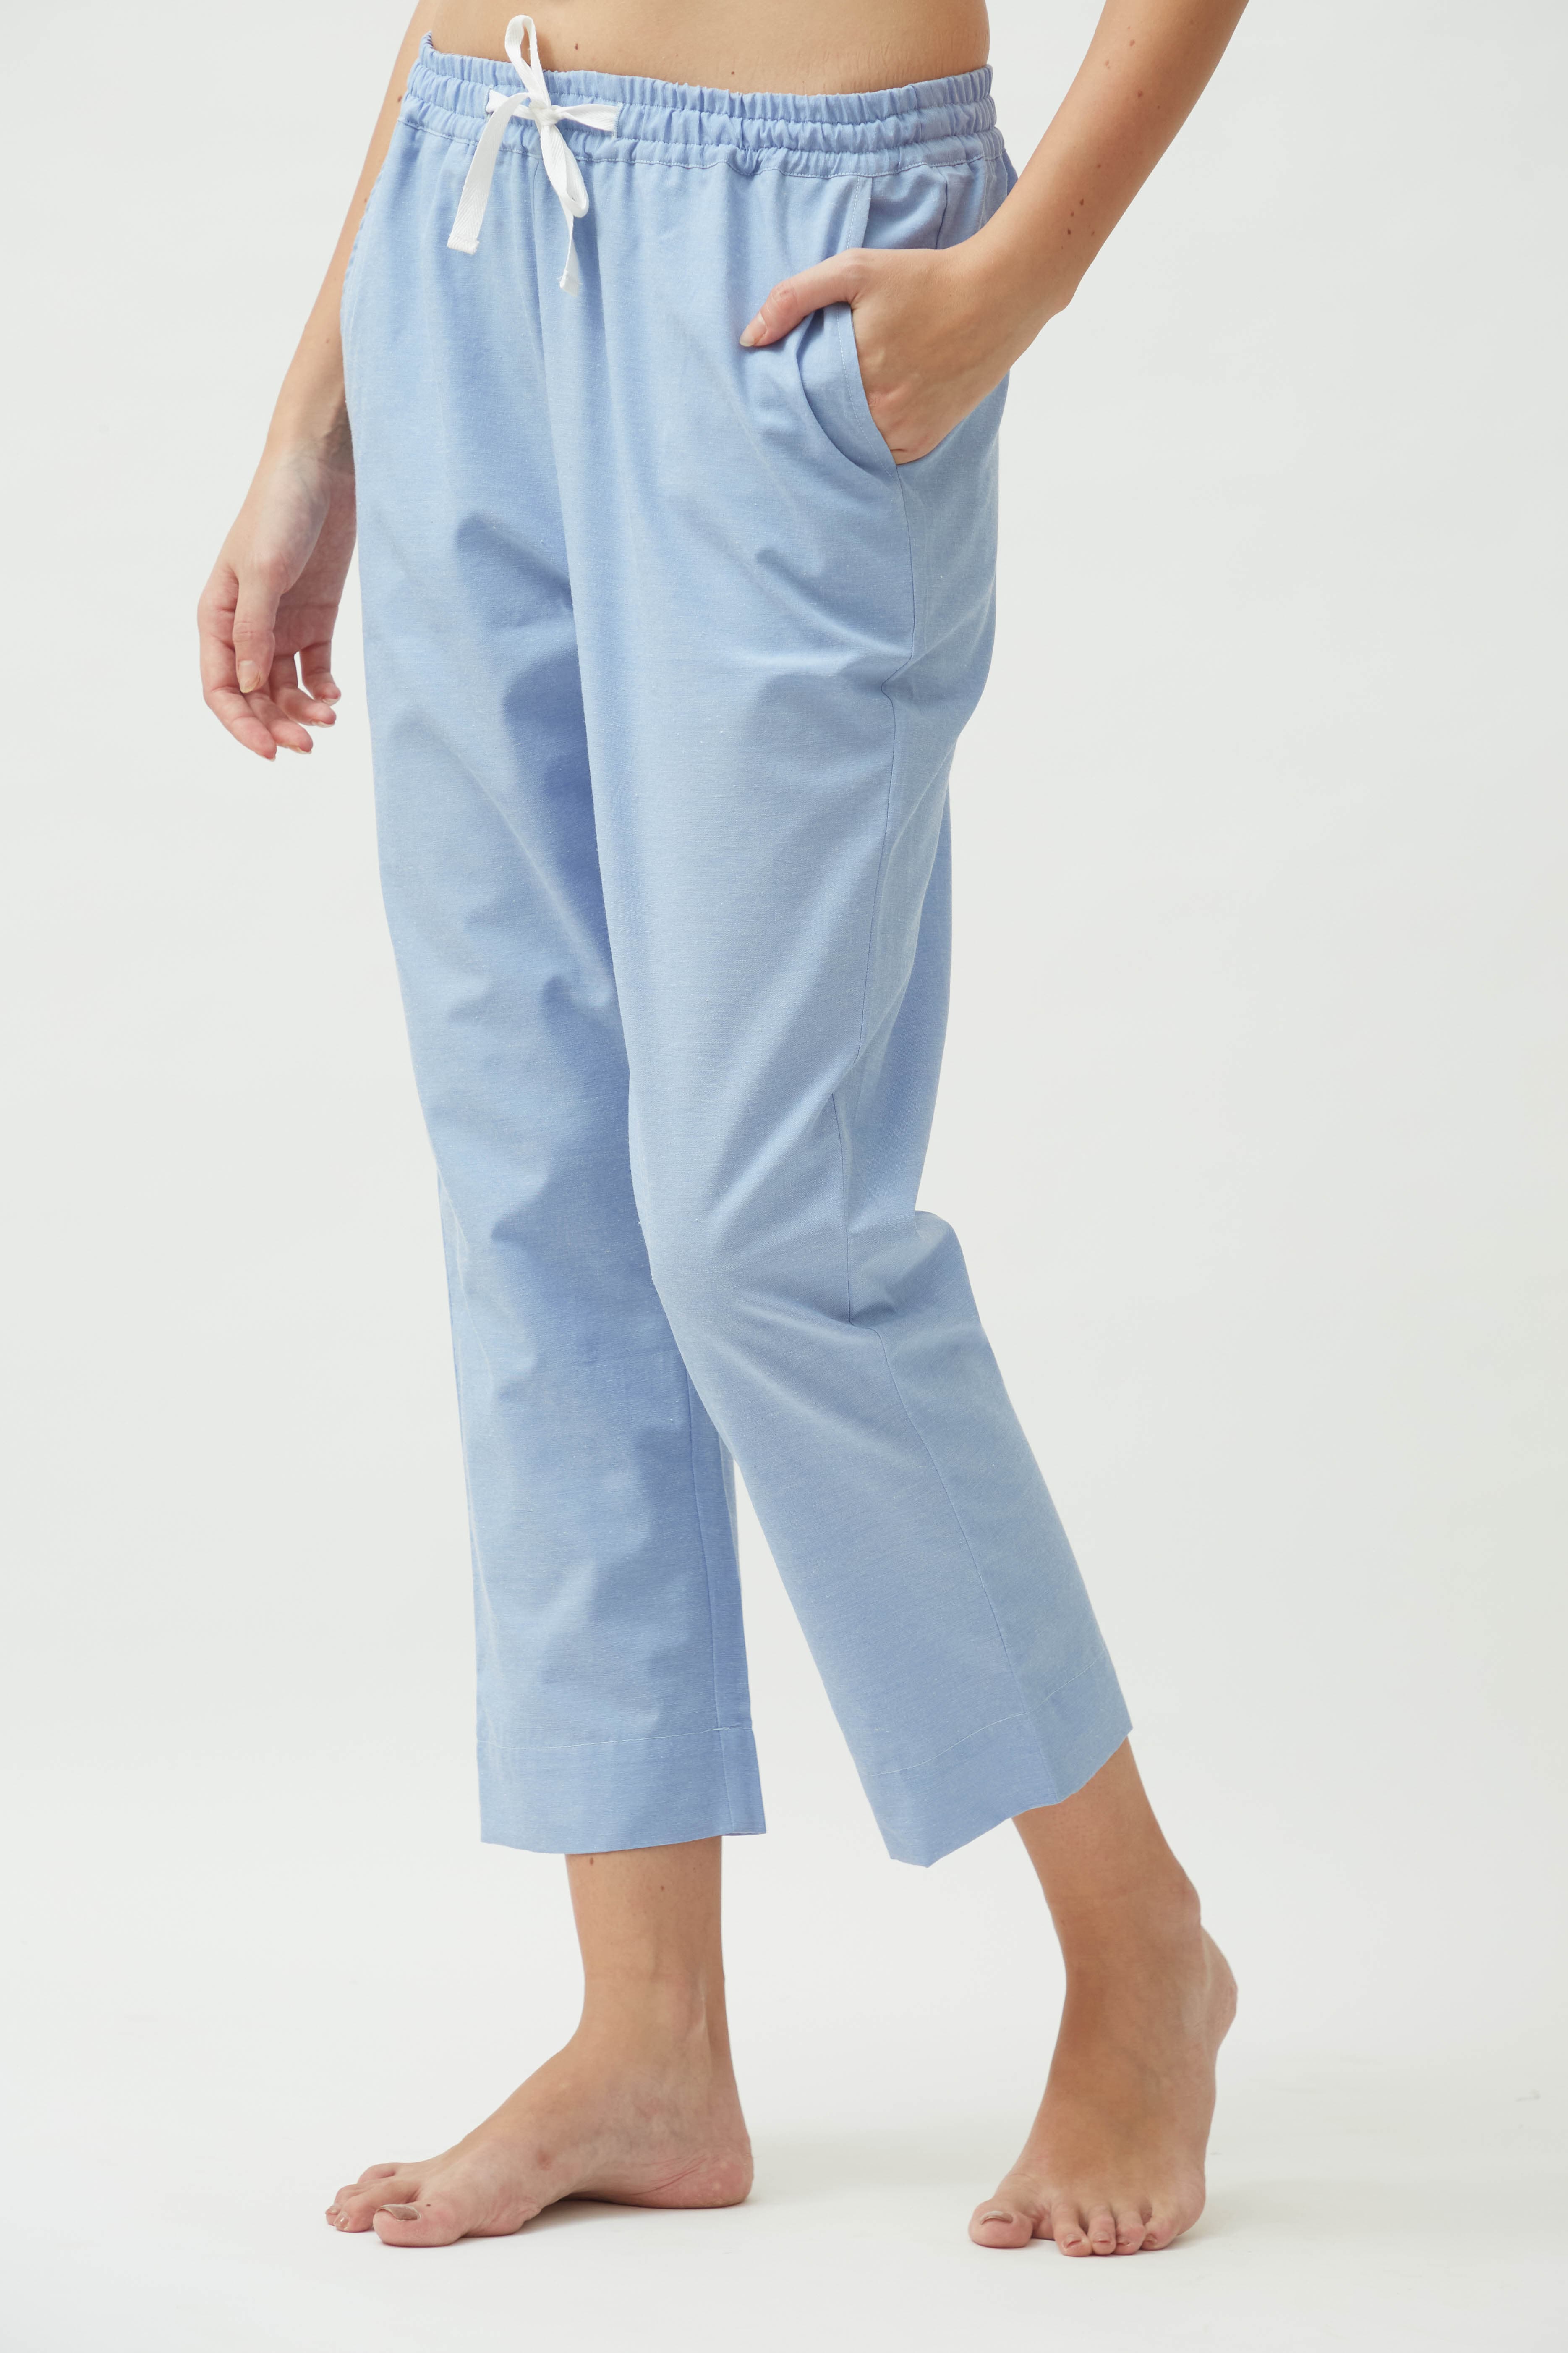 Saltpetre womens wear, indo-western pants for semi formal, casual, occassional wear. Comfortably elegant straight leg pants in pale blue colour. Ankle length, back elastic and side pockets.